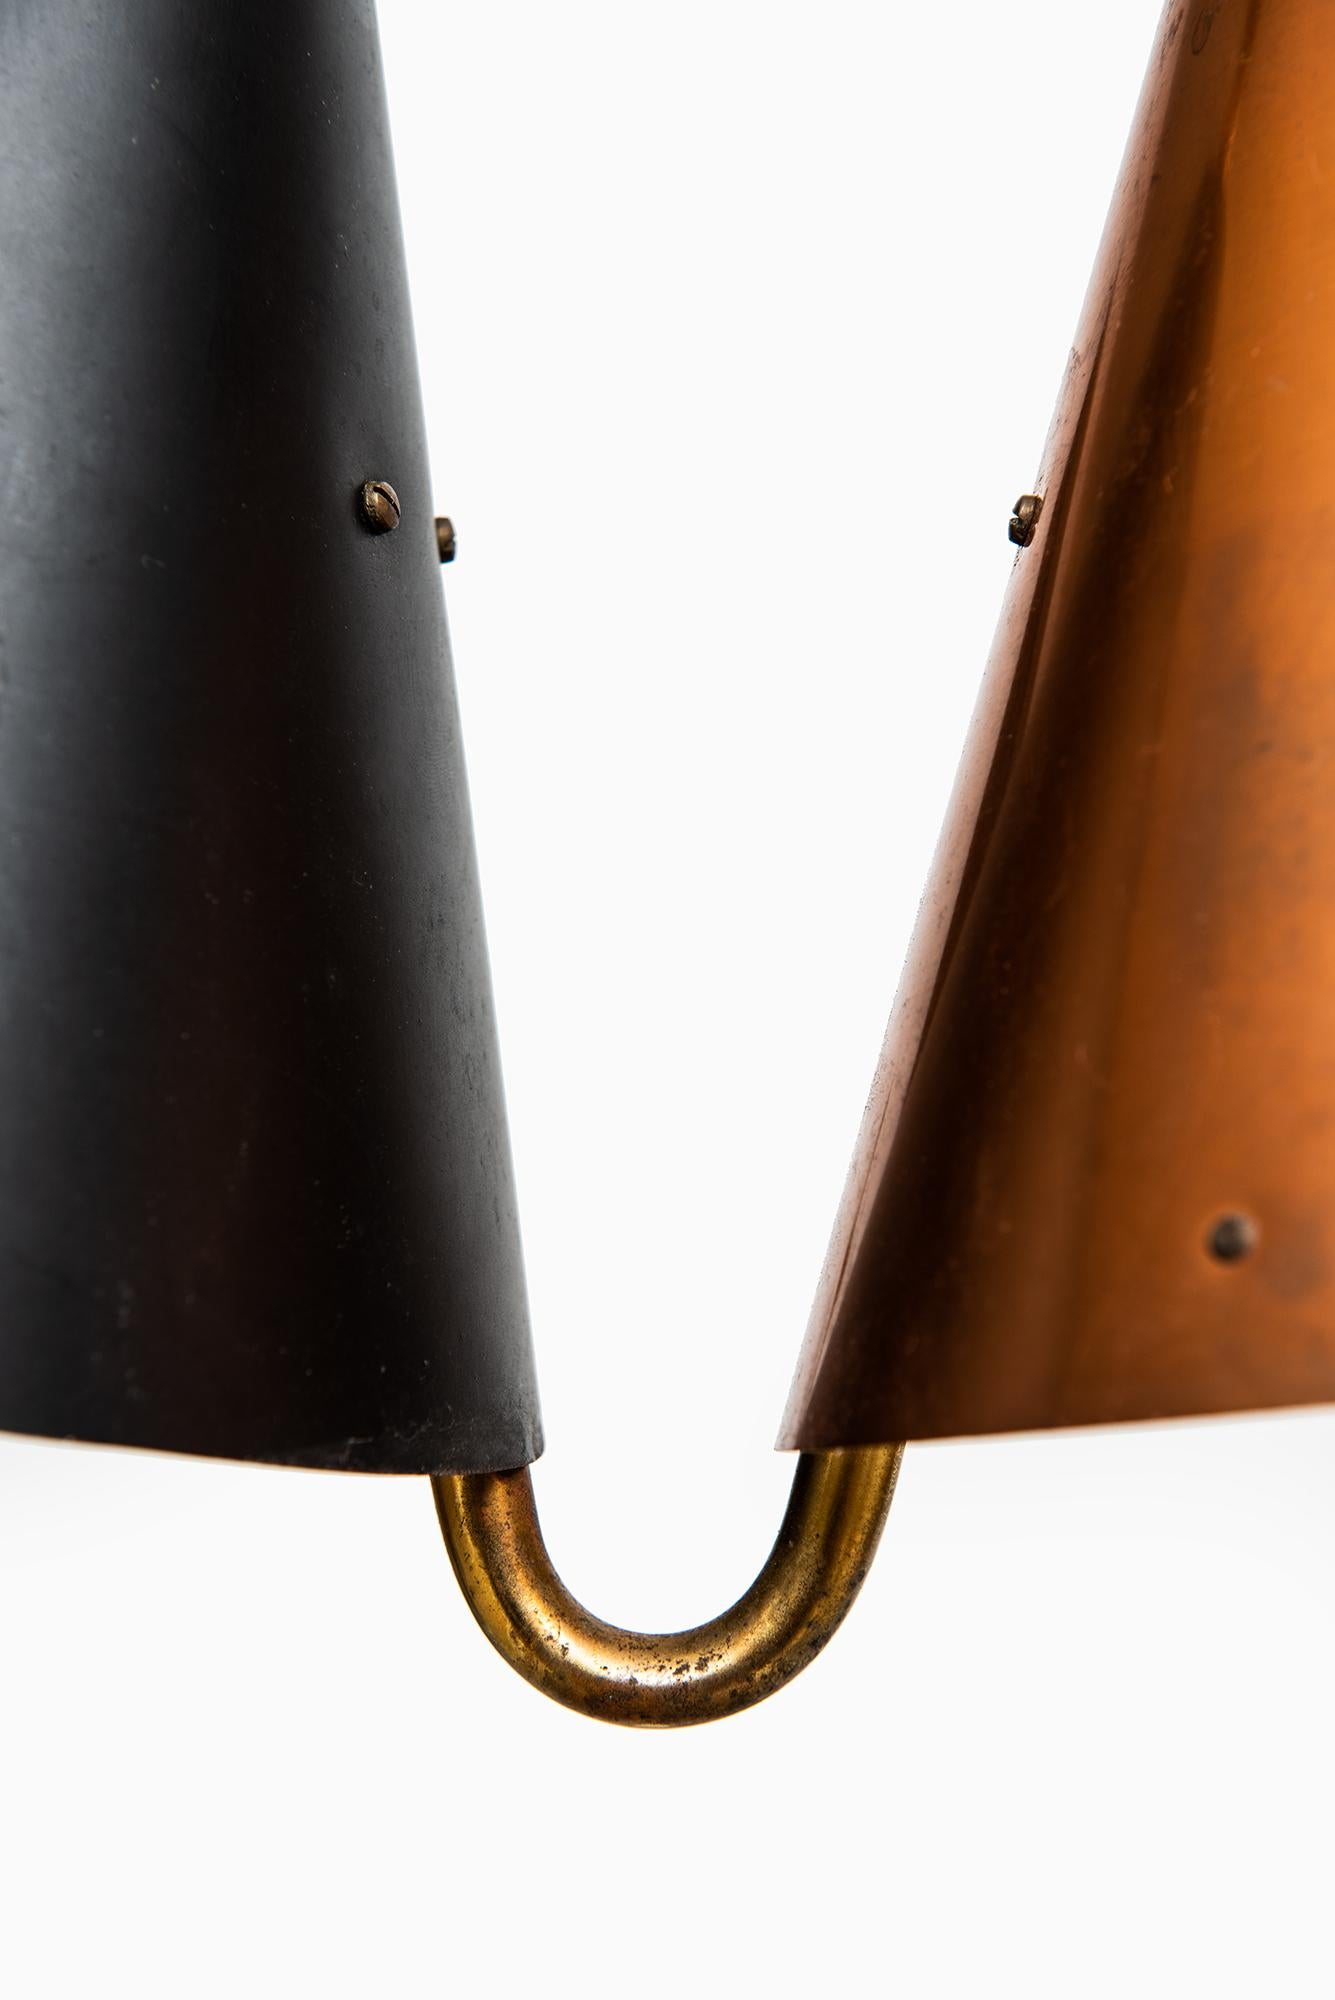 Scandinavian Modern Ceiling Lamp Attributed to Svend Aage Holm Sørensen Produced in Denmark